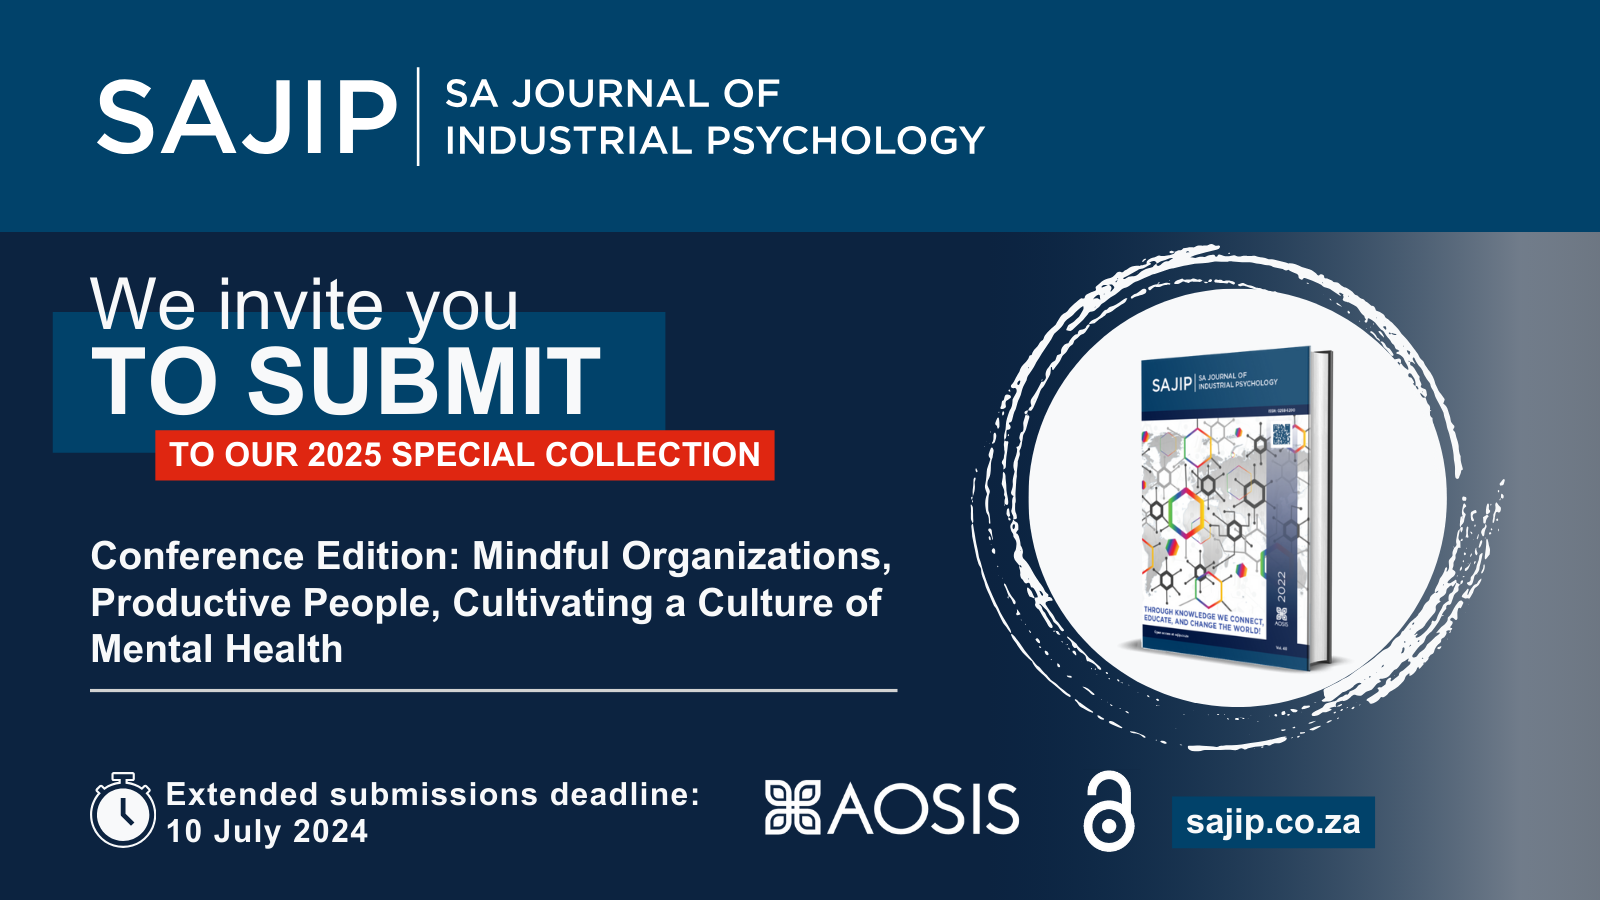 'SA Journal of Industrial Psychology' 2025 Special Collection